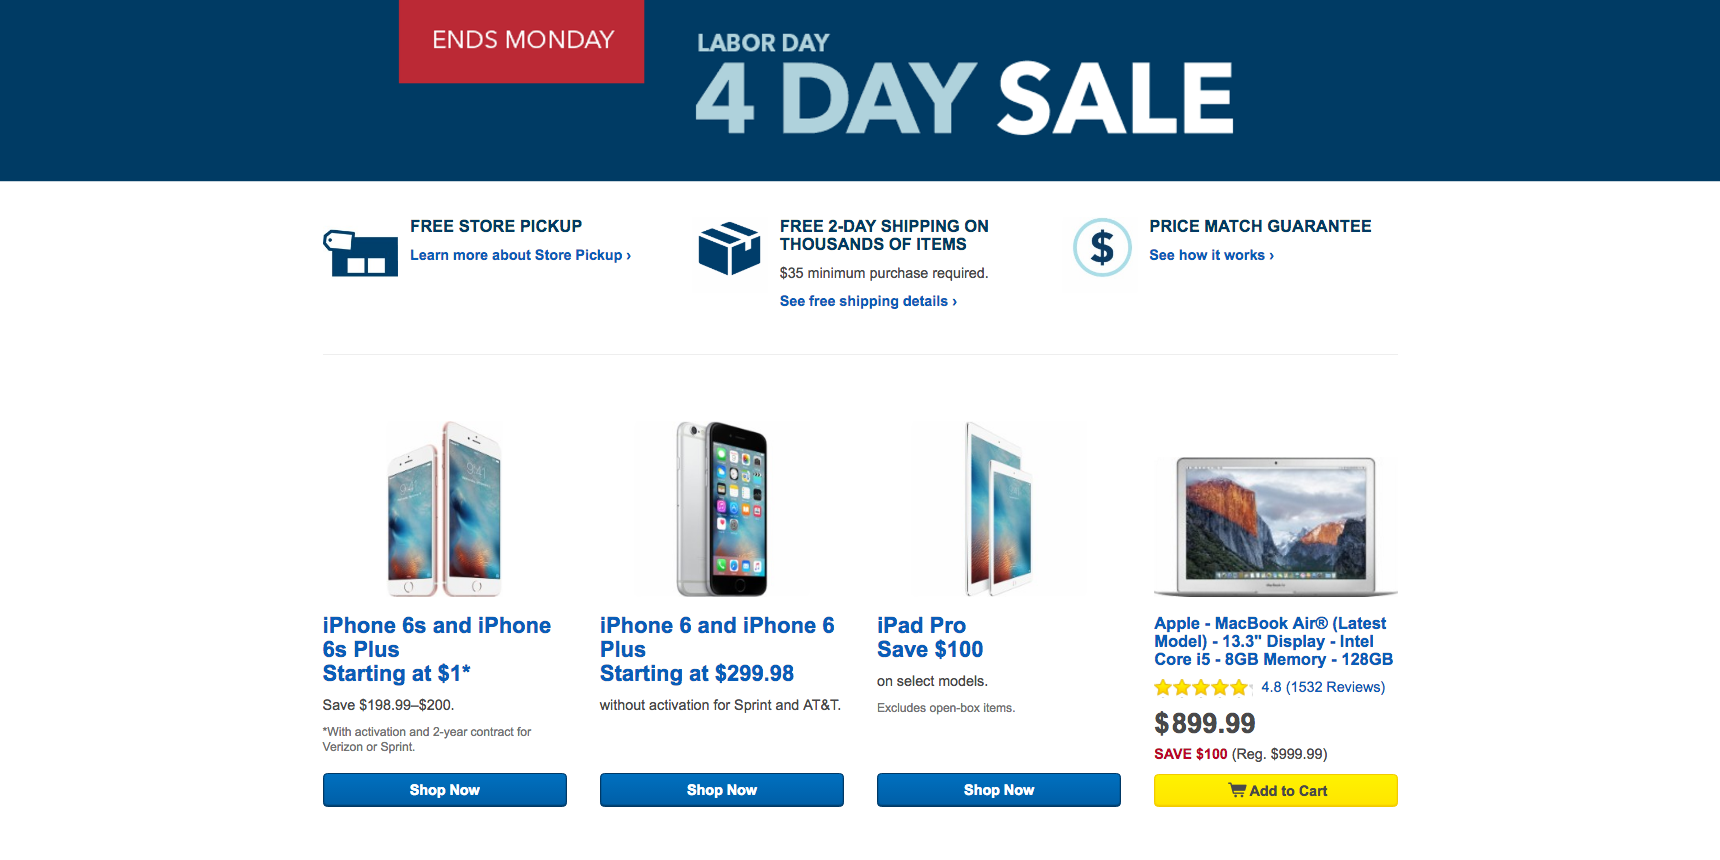 Best Buy launches wideranging Labor Day sale covering all things tech